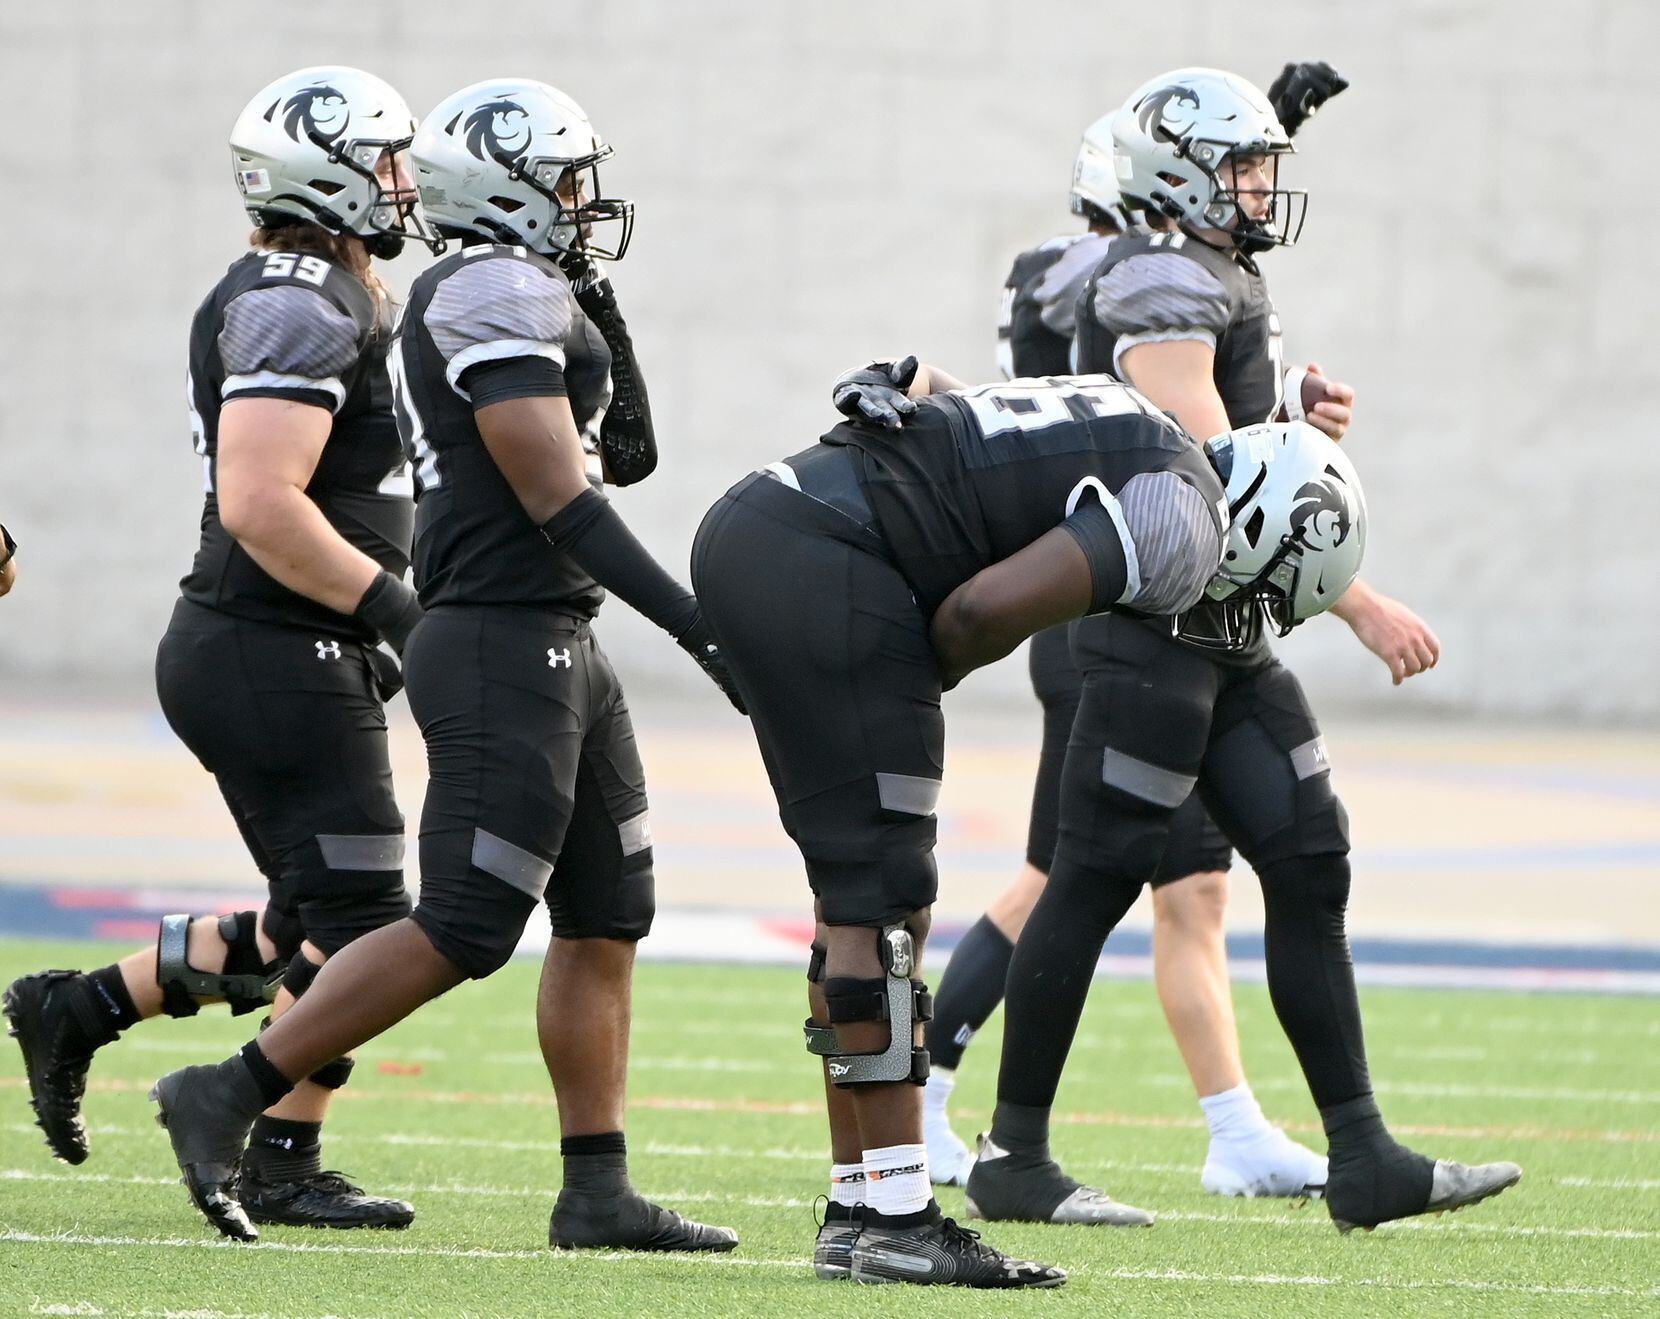 Denton Guyer's Willie Goodacre (66) takes a bow as he walks off the field with teammate after their 25-22 win of a Class 6A Division II Region I final high school playoff football game between Denton Guyer and Prosper, Saturday, Dec. 4, 2021, in Allen, Texas. (Matt Strasen/Special Contributor)